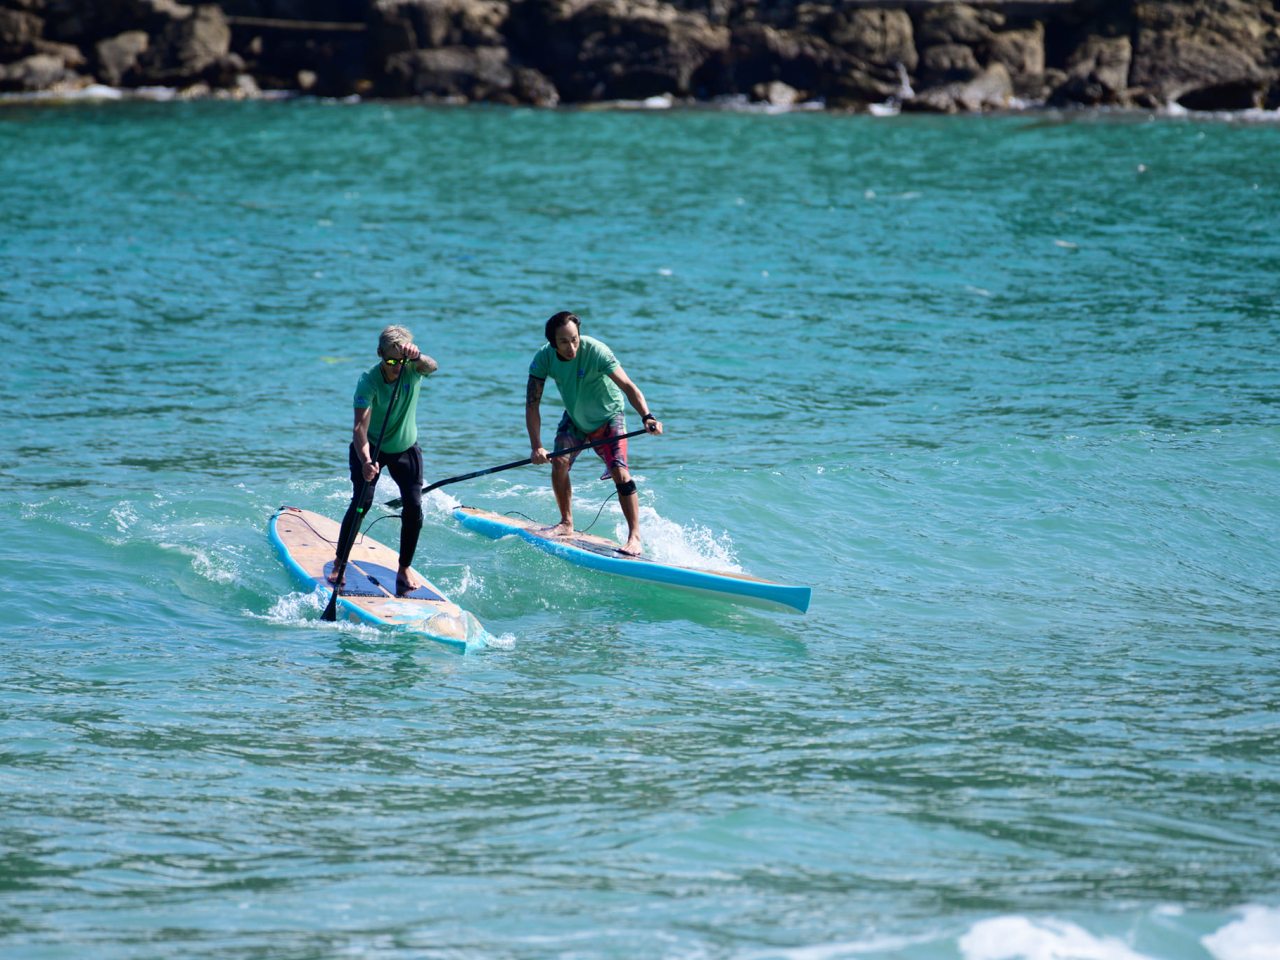 Paddle board beginners urged to stay close to shore